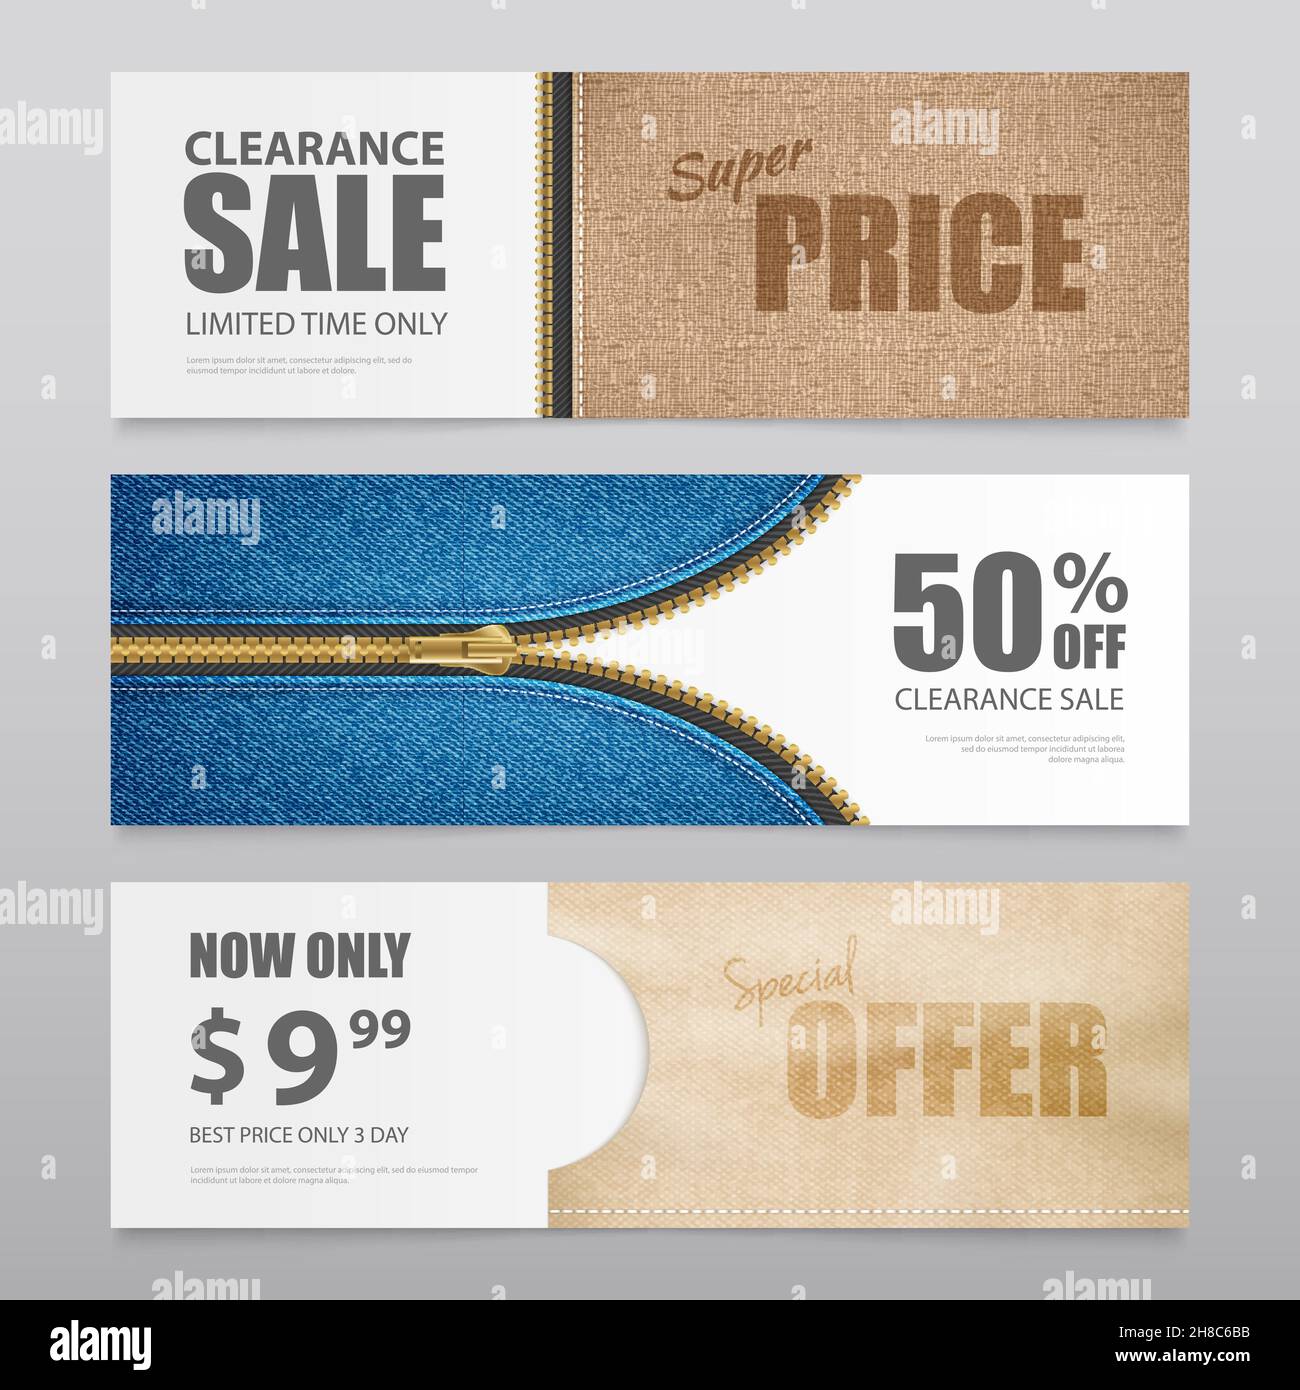 Cloth textile clearance sale special offer 3 horizontal advertisement banners with realistic fabric texture isolated vector illustration Stock Vector